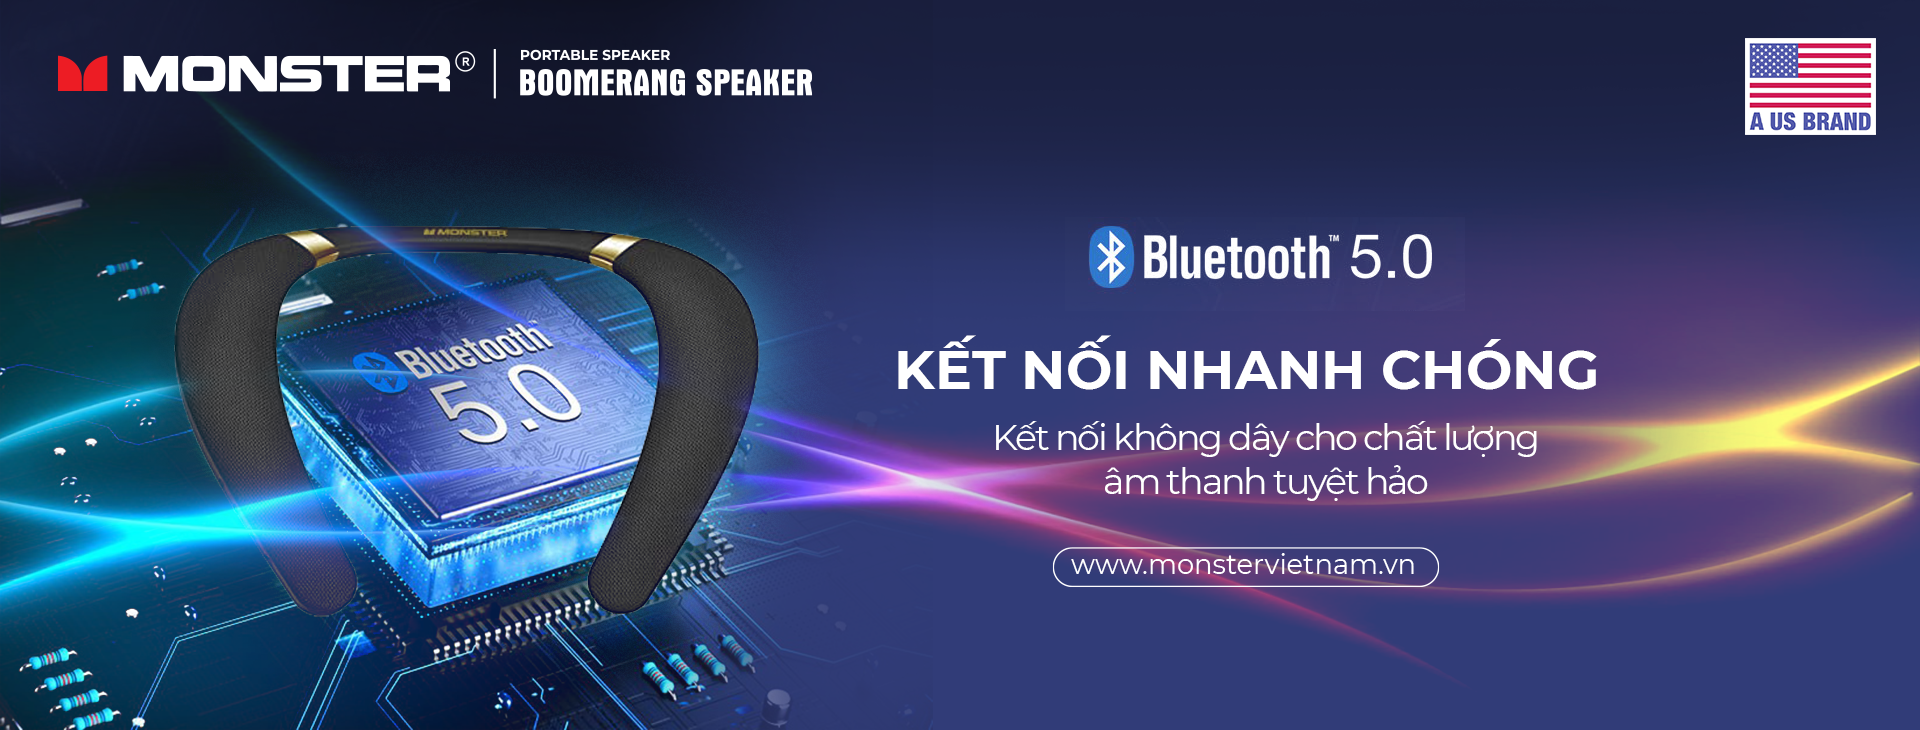 Loa Monster Boomerang Neckband | Anh Duy Audio